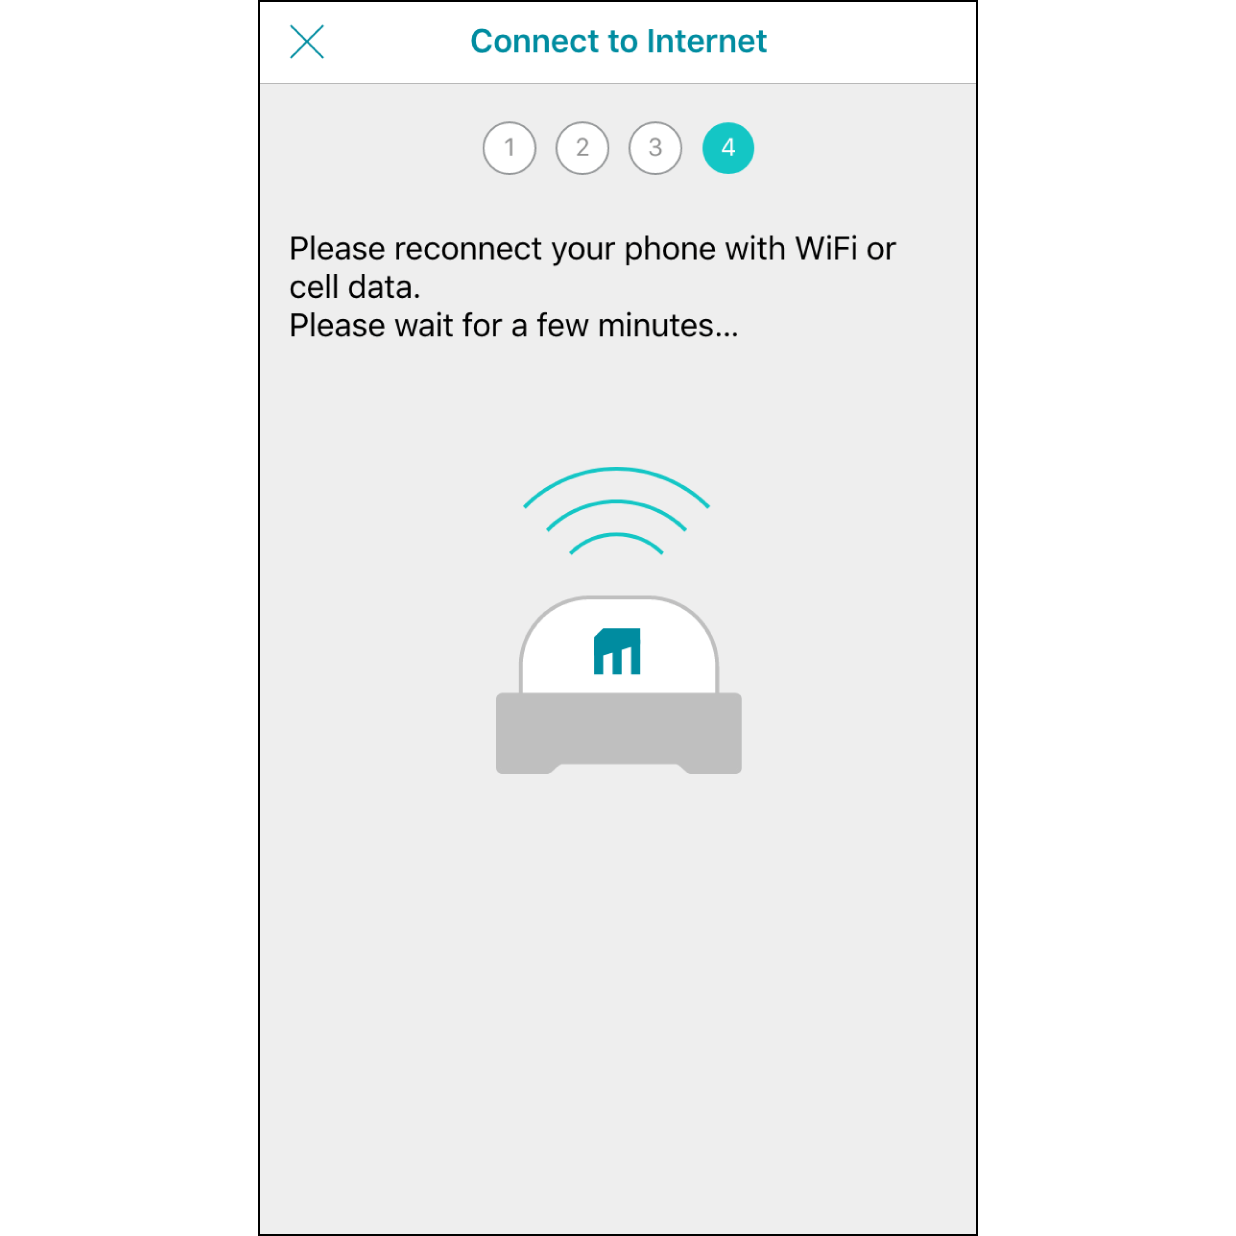 10. Connect to Personal HotspotGo back to Muro Box app, wait 30 seconds for Muro Box to connect to your Personal Hotspot.